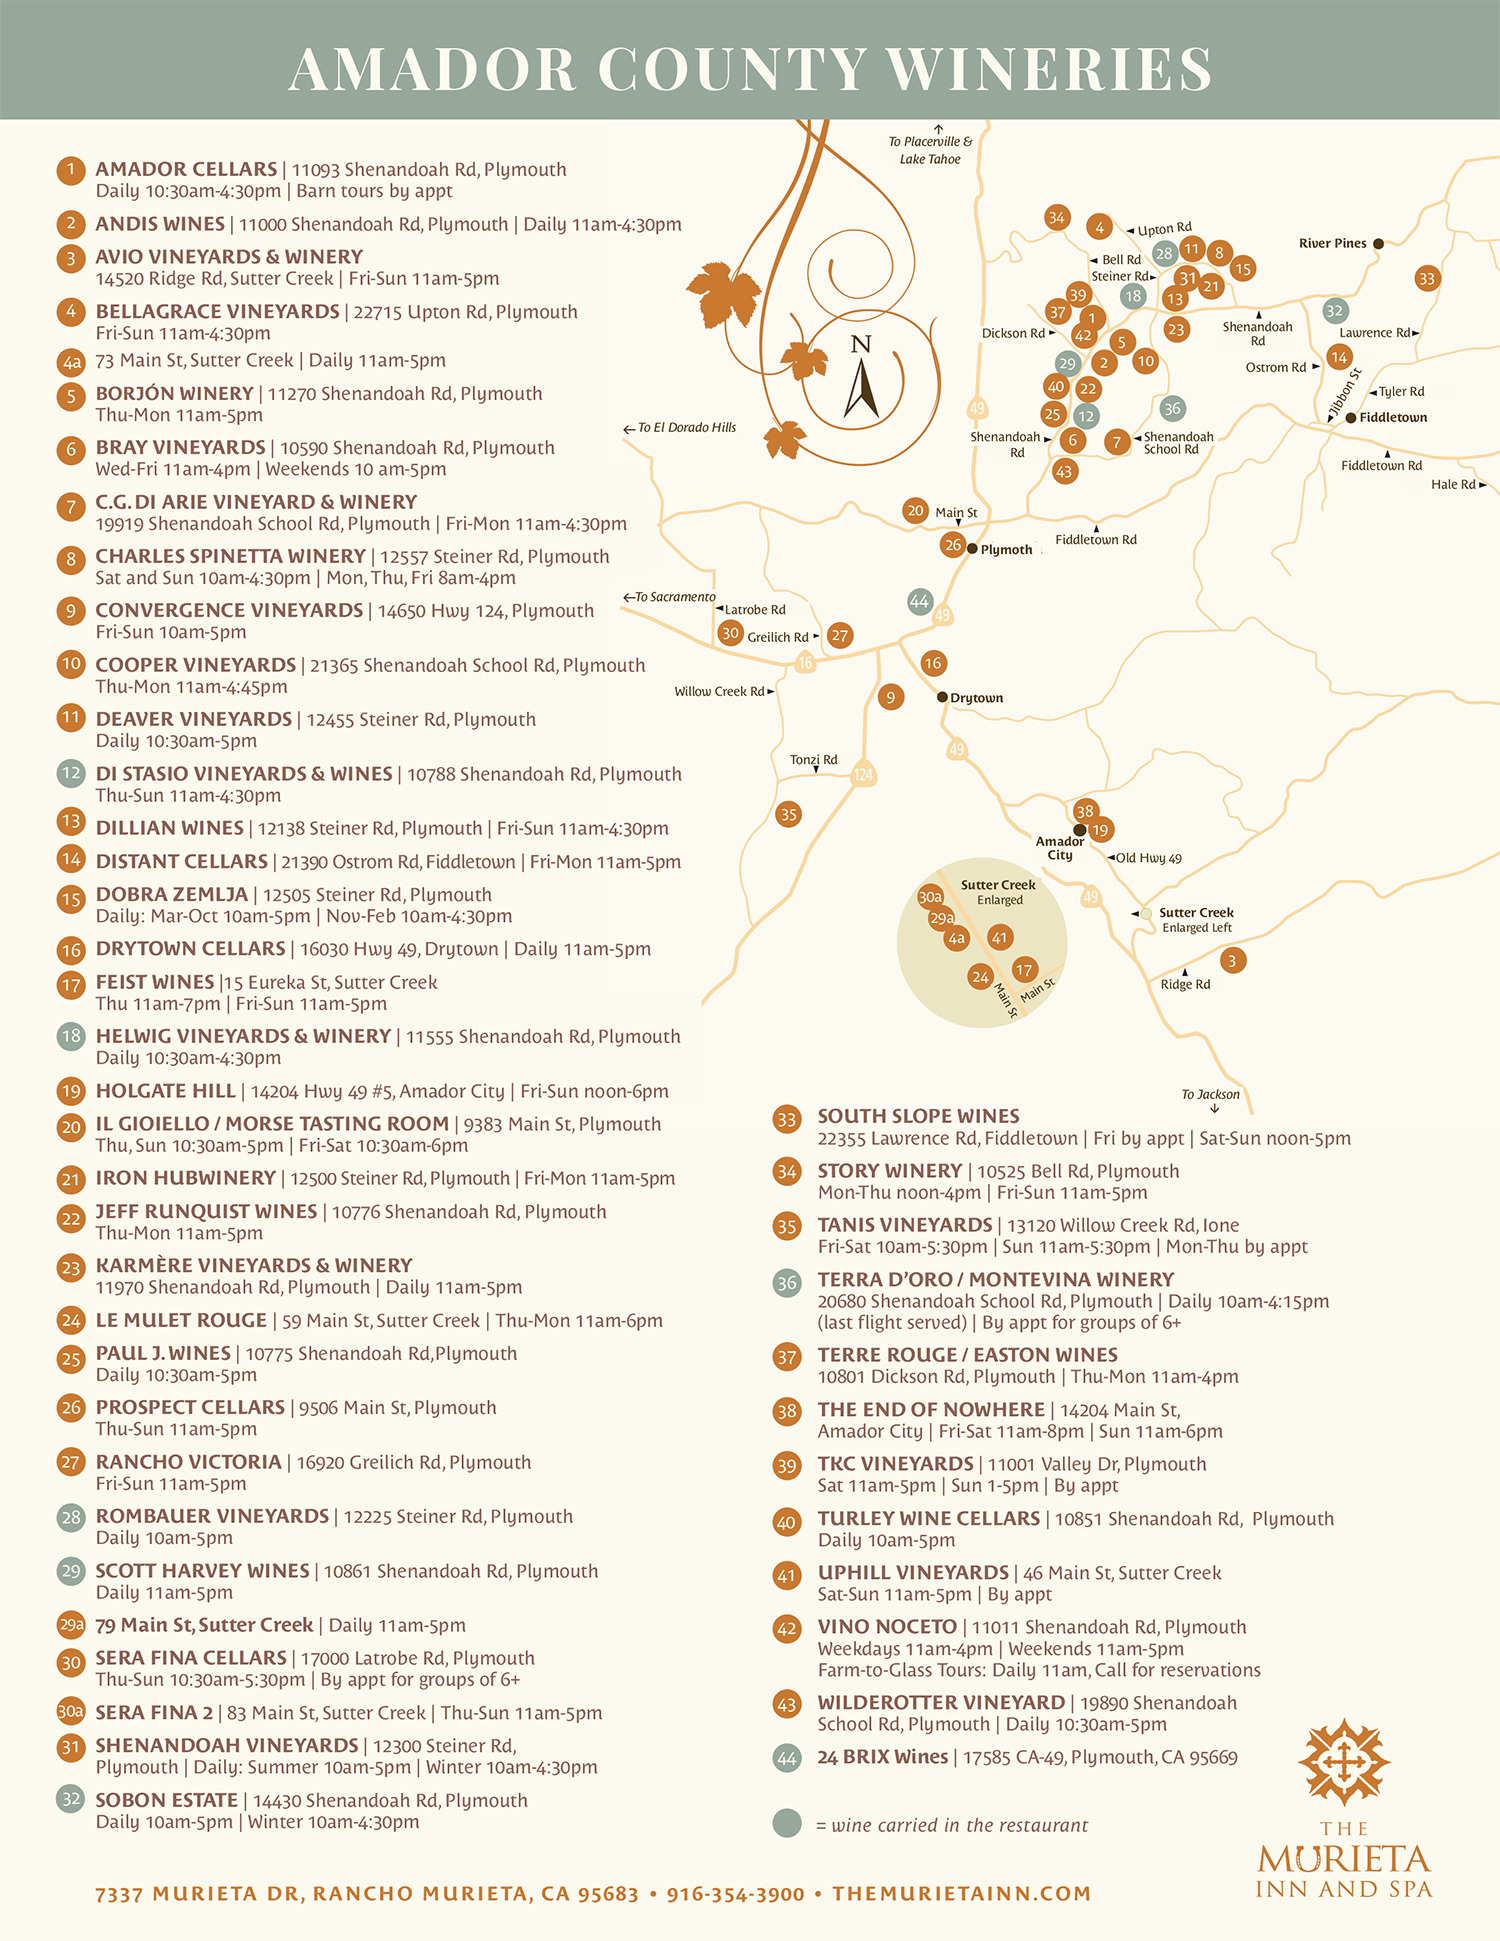 amador wine country map and top wineries, click link above to view accessible pdf map